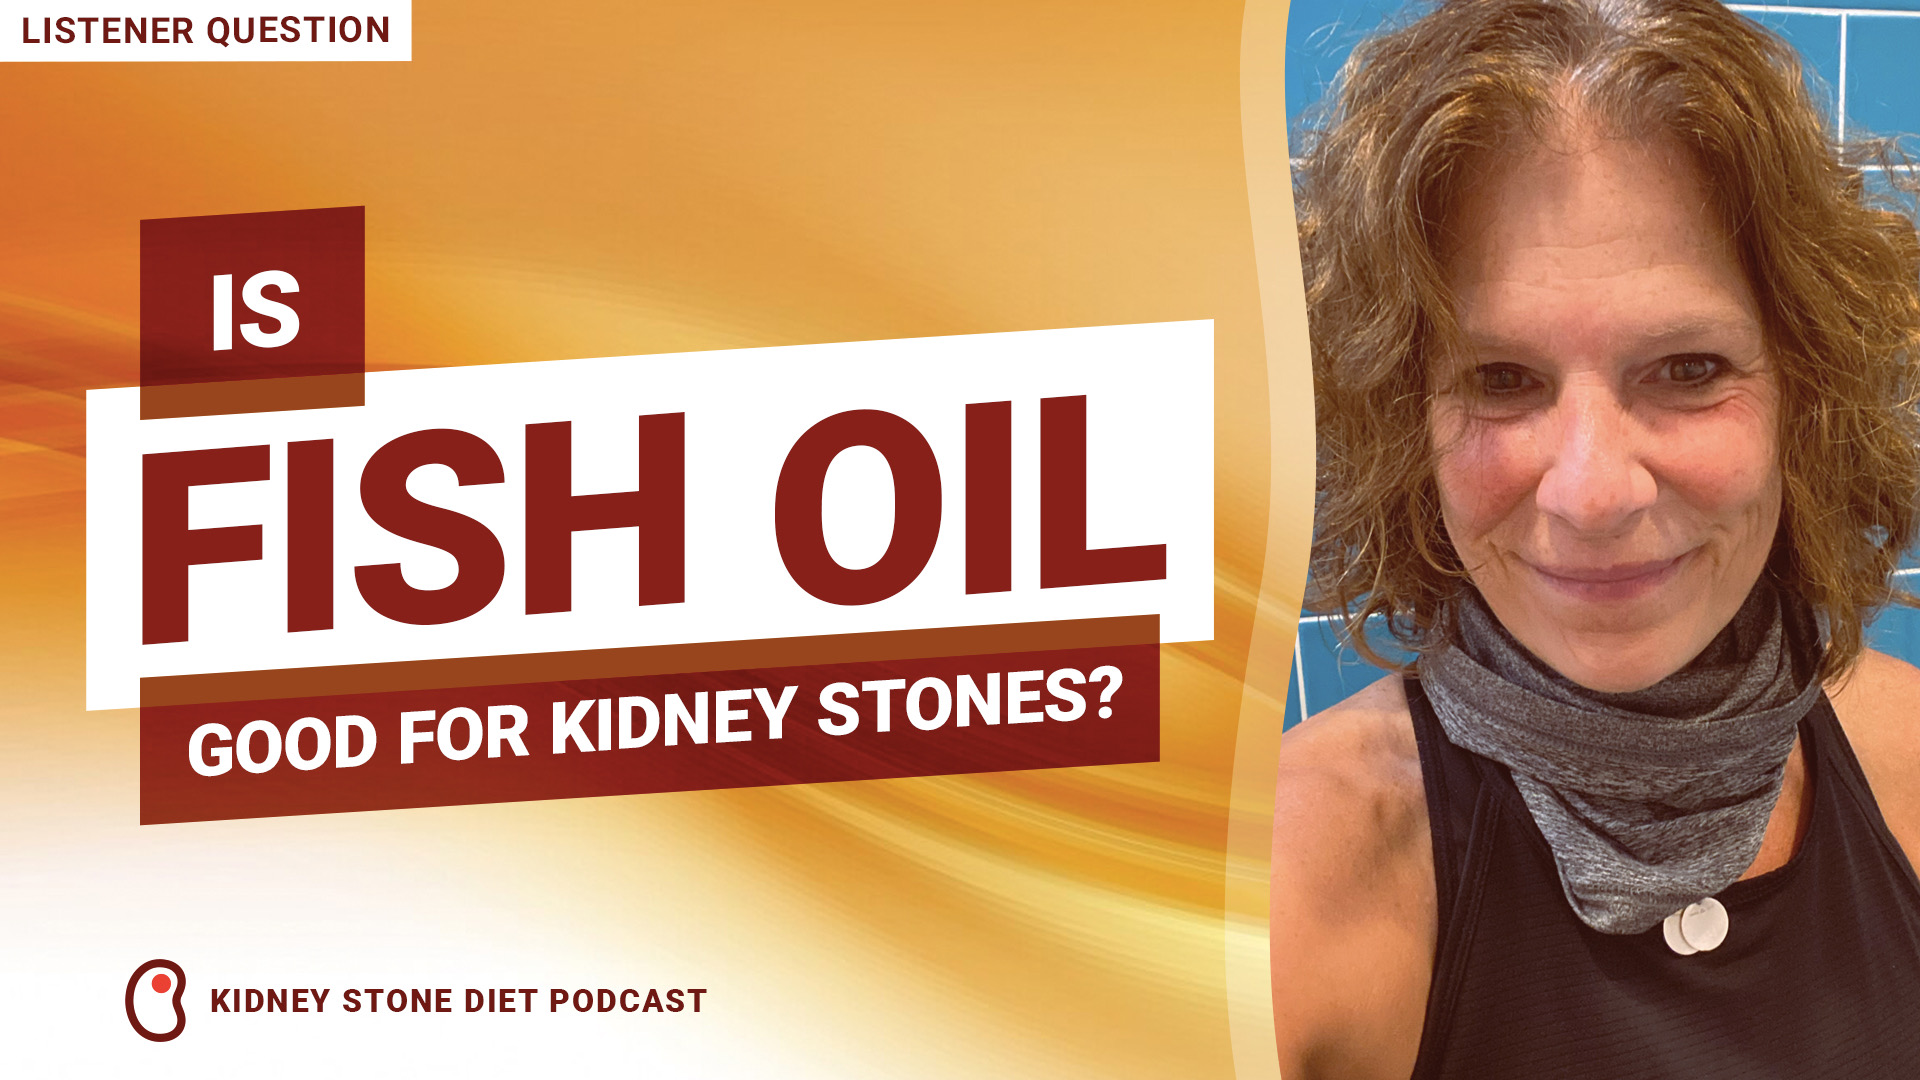 Is fish oil good for kidney stones?